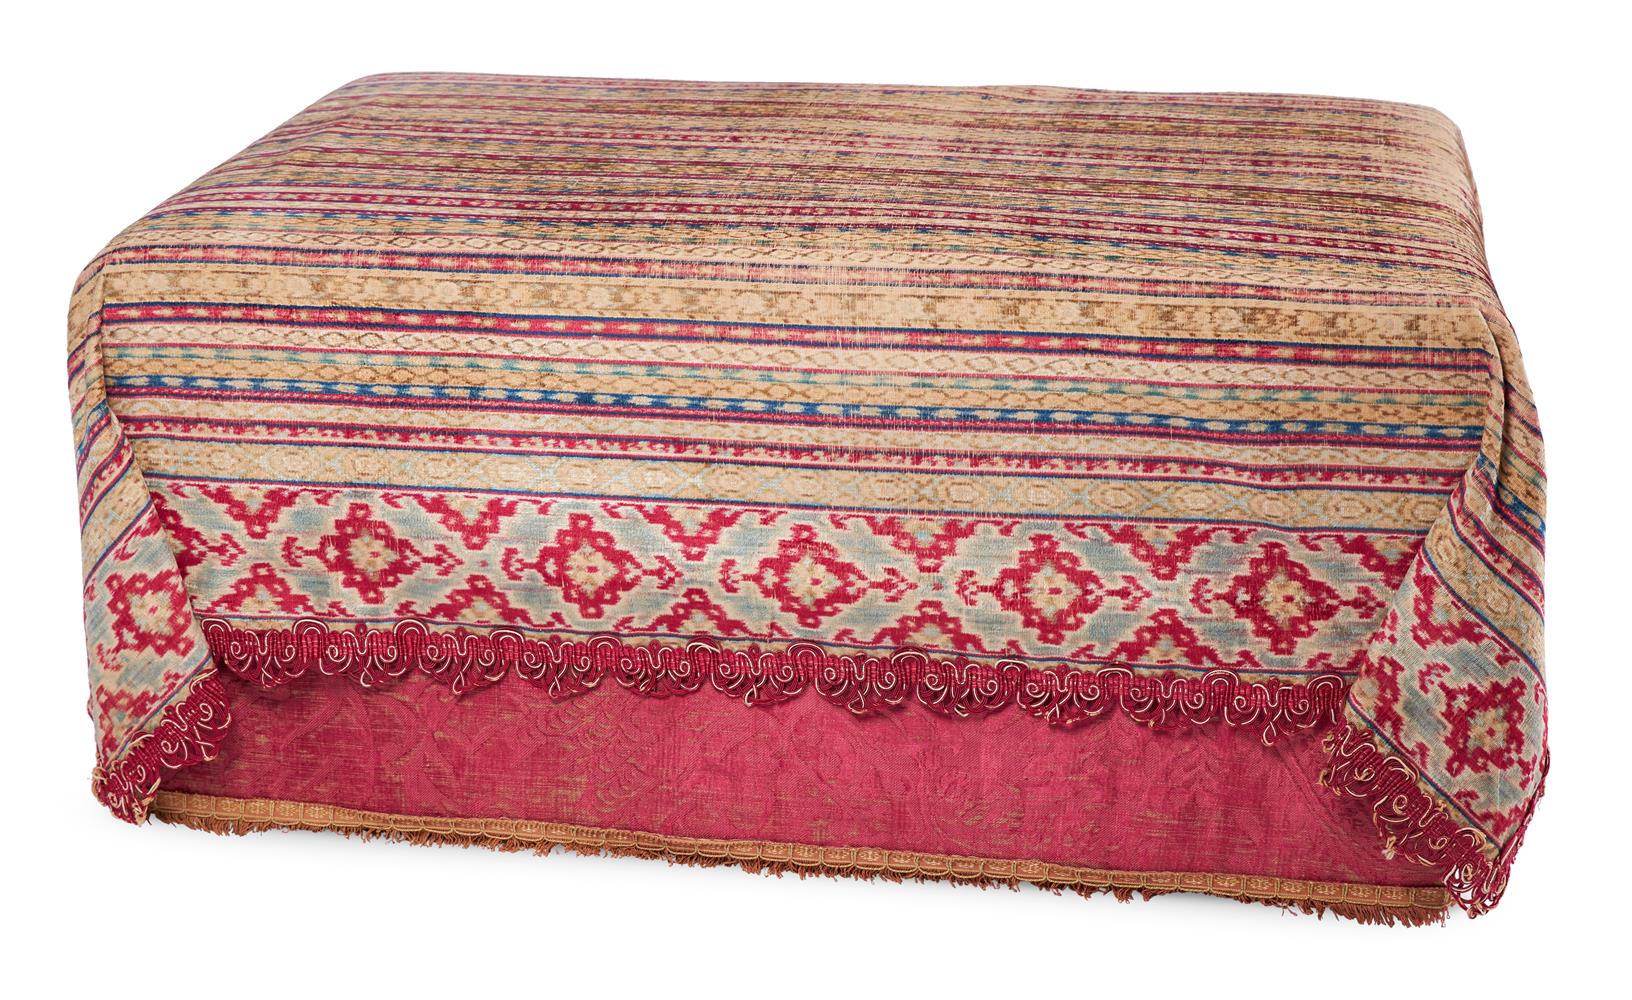 A TEXTILE COVERED OTTOMAN BY ROBERT KIME - Image 2 of 3